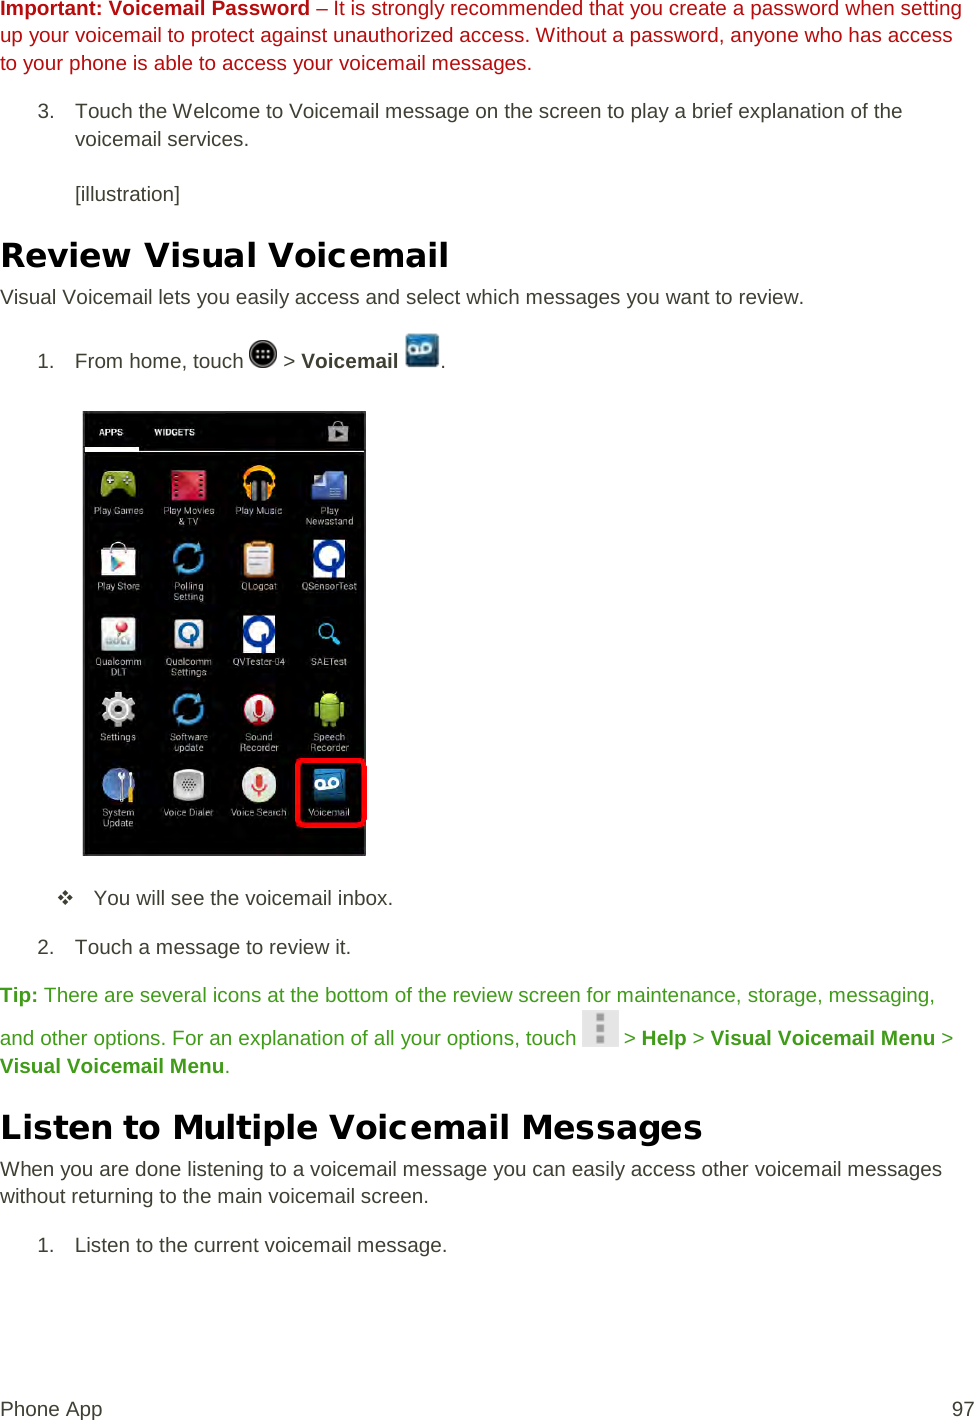 Important: Voicemail Password – It is strongly recommended that you create a password when setting up your voicemail to protect against unauthorized access. Without a password, anyone who has access to your phone is able to access your voicemail messages. 3. Touch the Welcome to Voicemail message on the screen to play a brief explanation of the voicemail services.  [illustration] Review Visual Voicemail Visual Voicemail lets you easily access and select which messages you want to review. 1.  From home, touch   &gt; Voicemail  .    You will see the voicemail inbox. 2. Touch a message to review it. Tip: There are several icons at the bottom of the review screen for maintenance, storage, messaging, and other options. For an explanation of all your options, touch   &gt; Help &gt; Visual Voicemail Menu &gt; Visual Voicemail Menu. Listen to Multiple Voicemail Messages When you are done listening to a voicemail message you can easily access other voicemail messages without returning to the main voicemail screen. 1. Listen to the current voicemail message. Phone App 97 